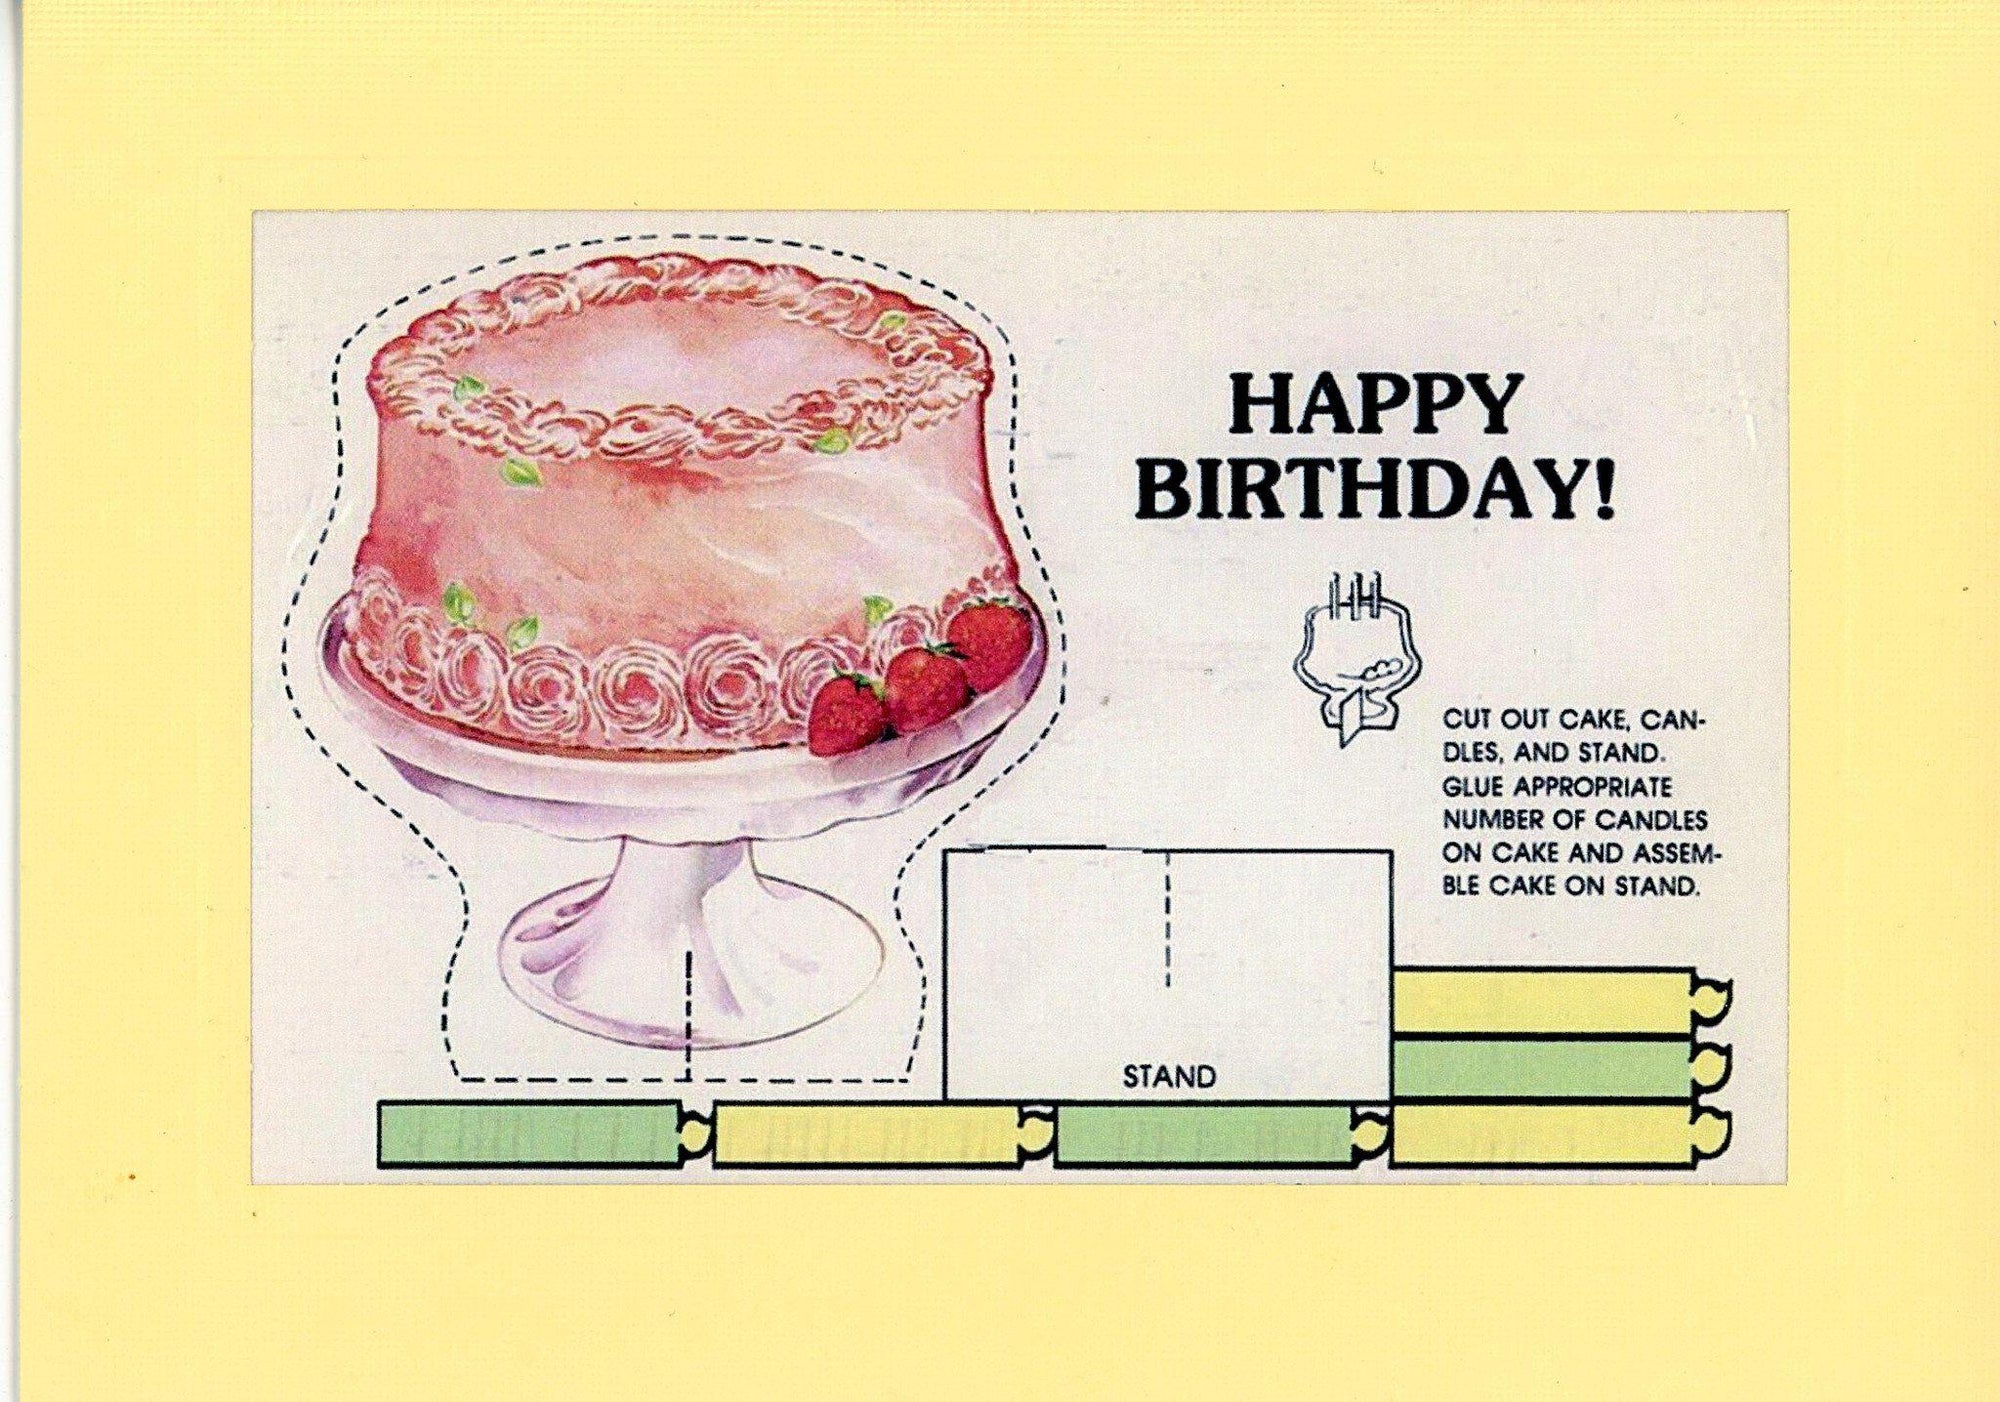 Happy Birthday - paper doll cake-Greetings from the Past-Plymouth Cards